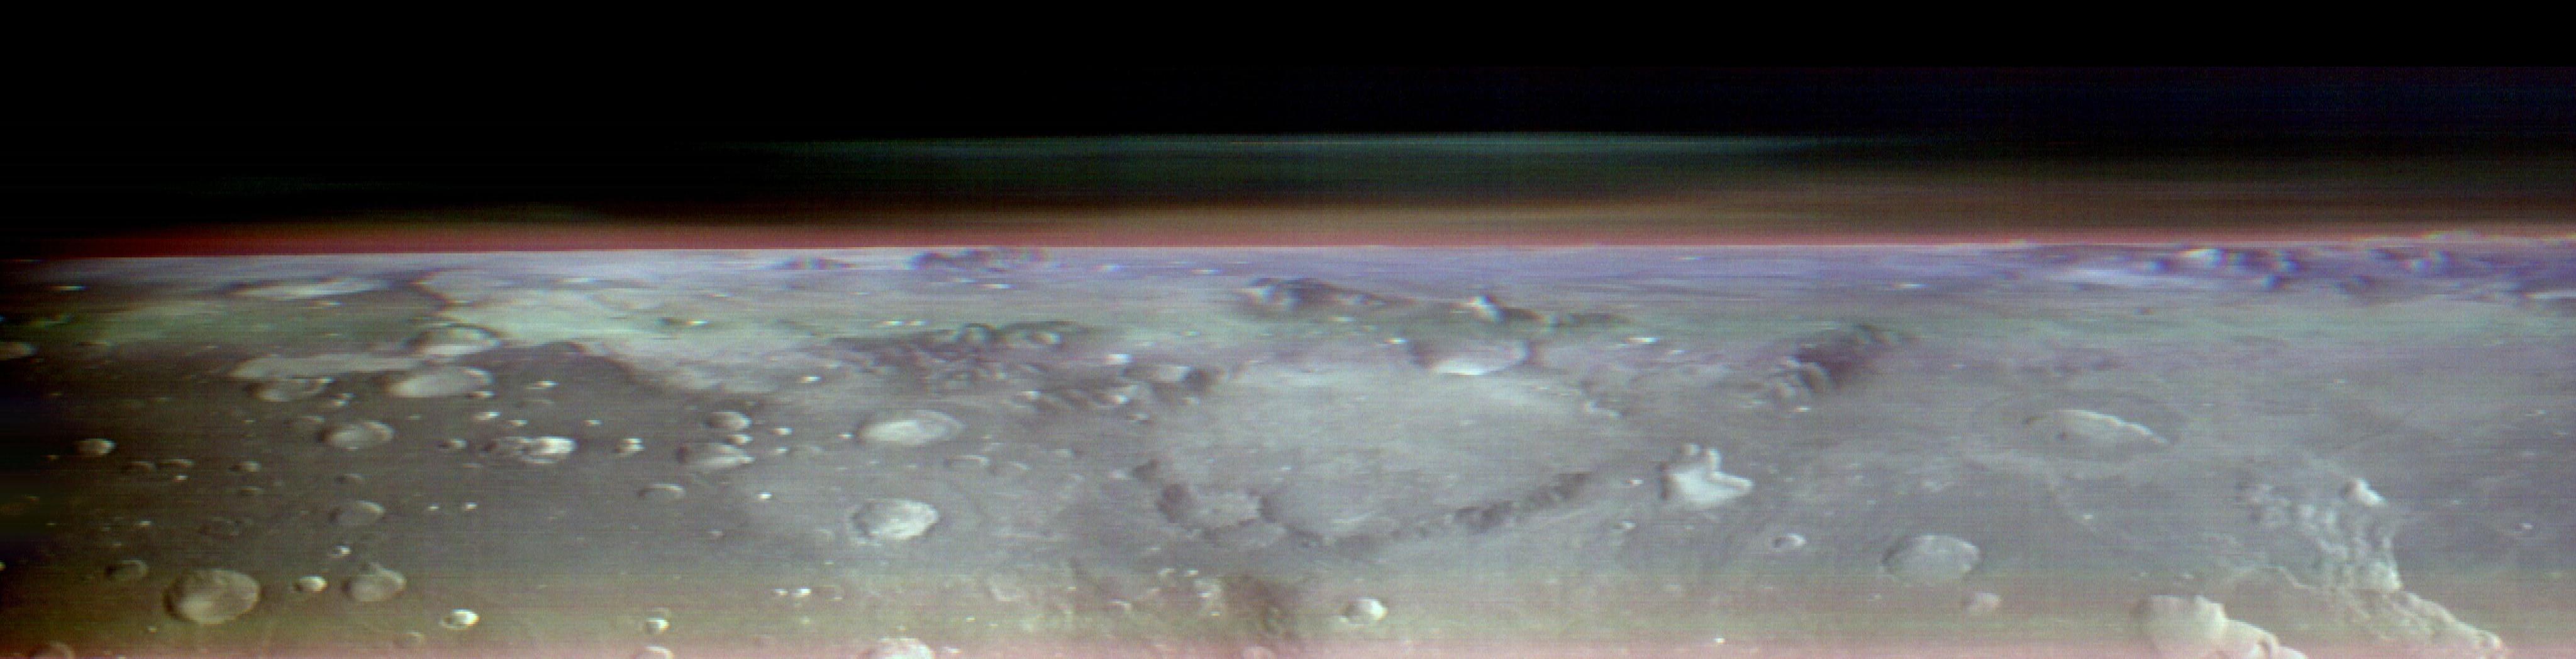 Water-ice (blue) and dust (red) in the atmosphere of Mars above the cratered Martian surface as viewed from orbit by the THEMIS camera (false-color composite image).